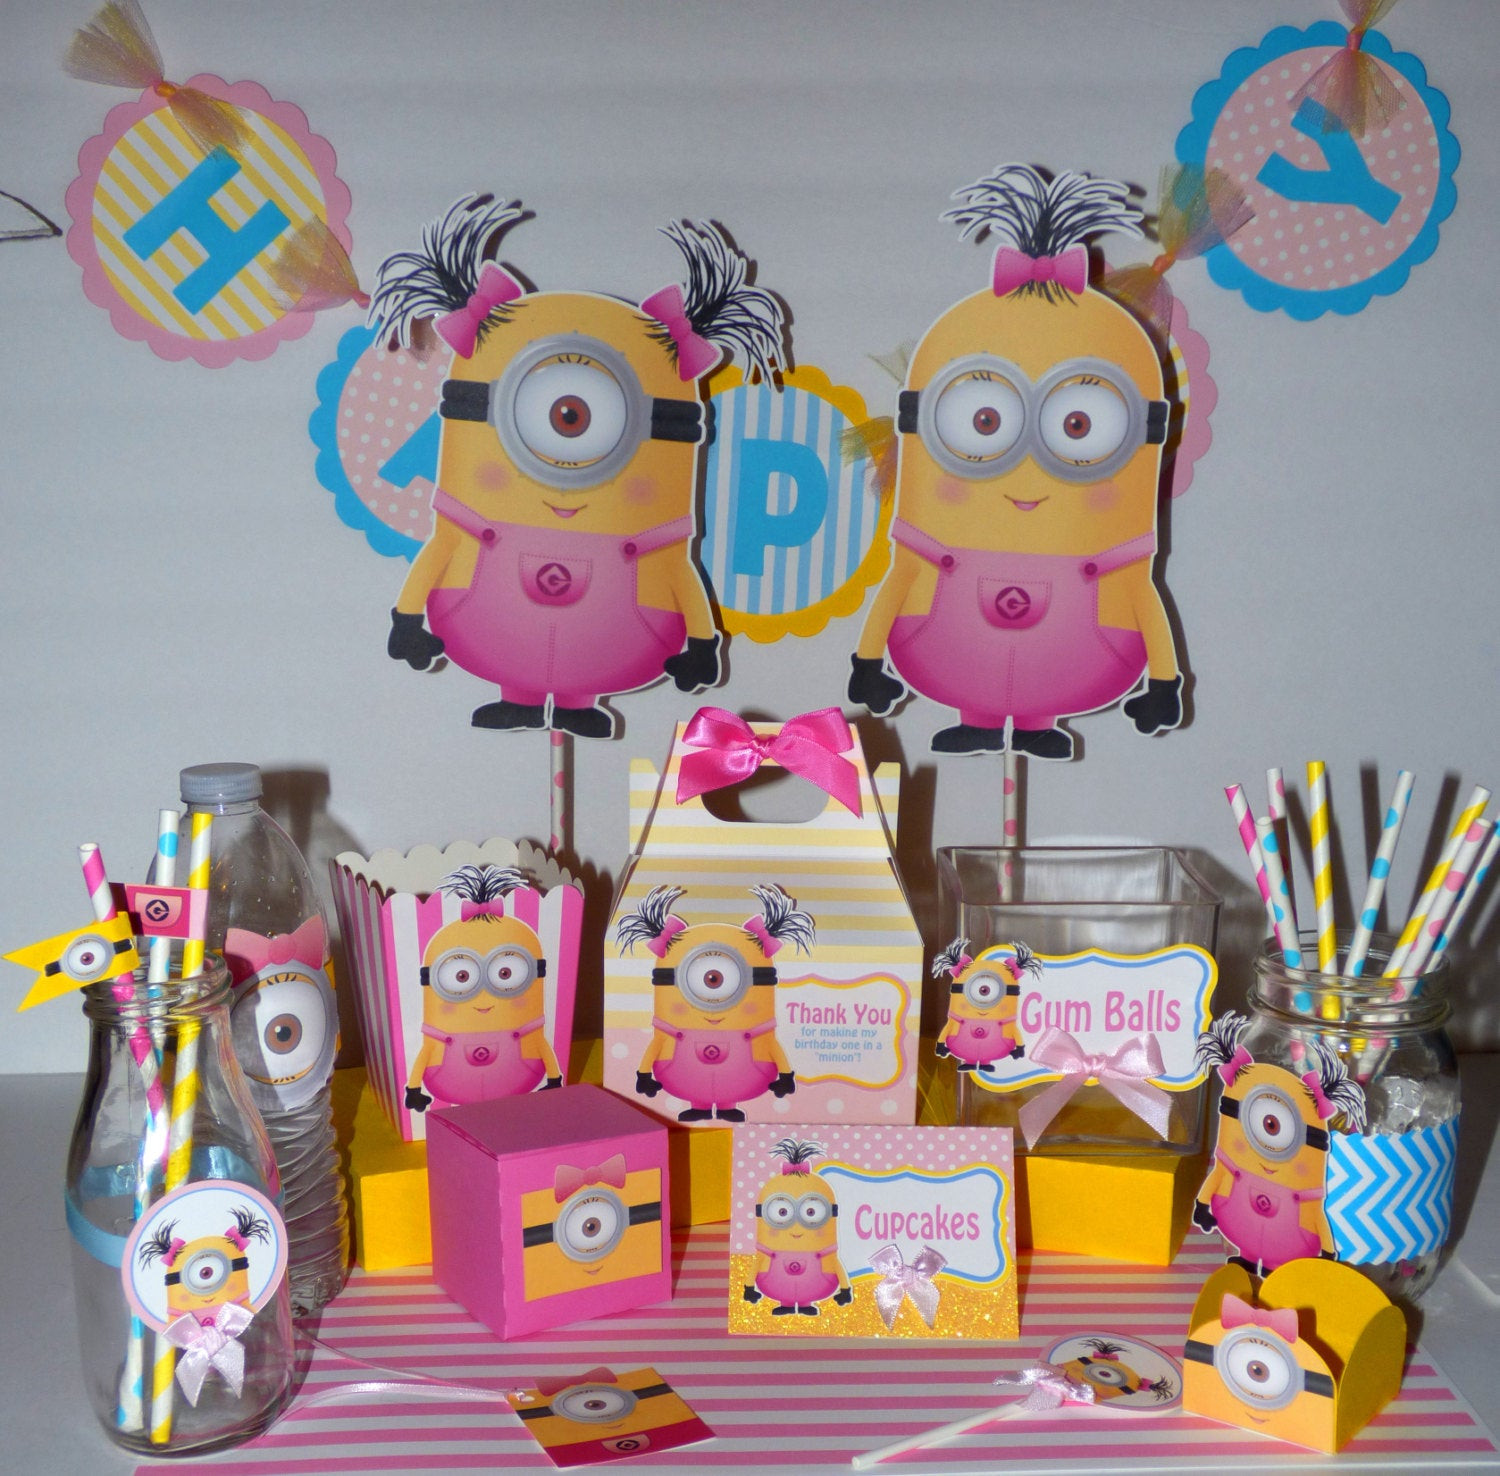 Minion Birthday Party
 Girl Minion Birthday Party Centerpieces Favor by